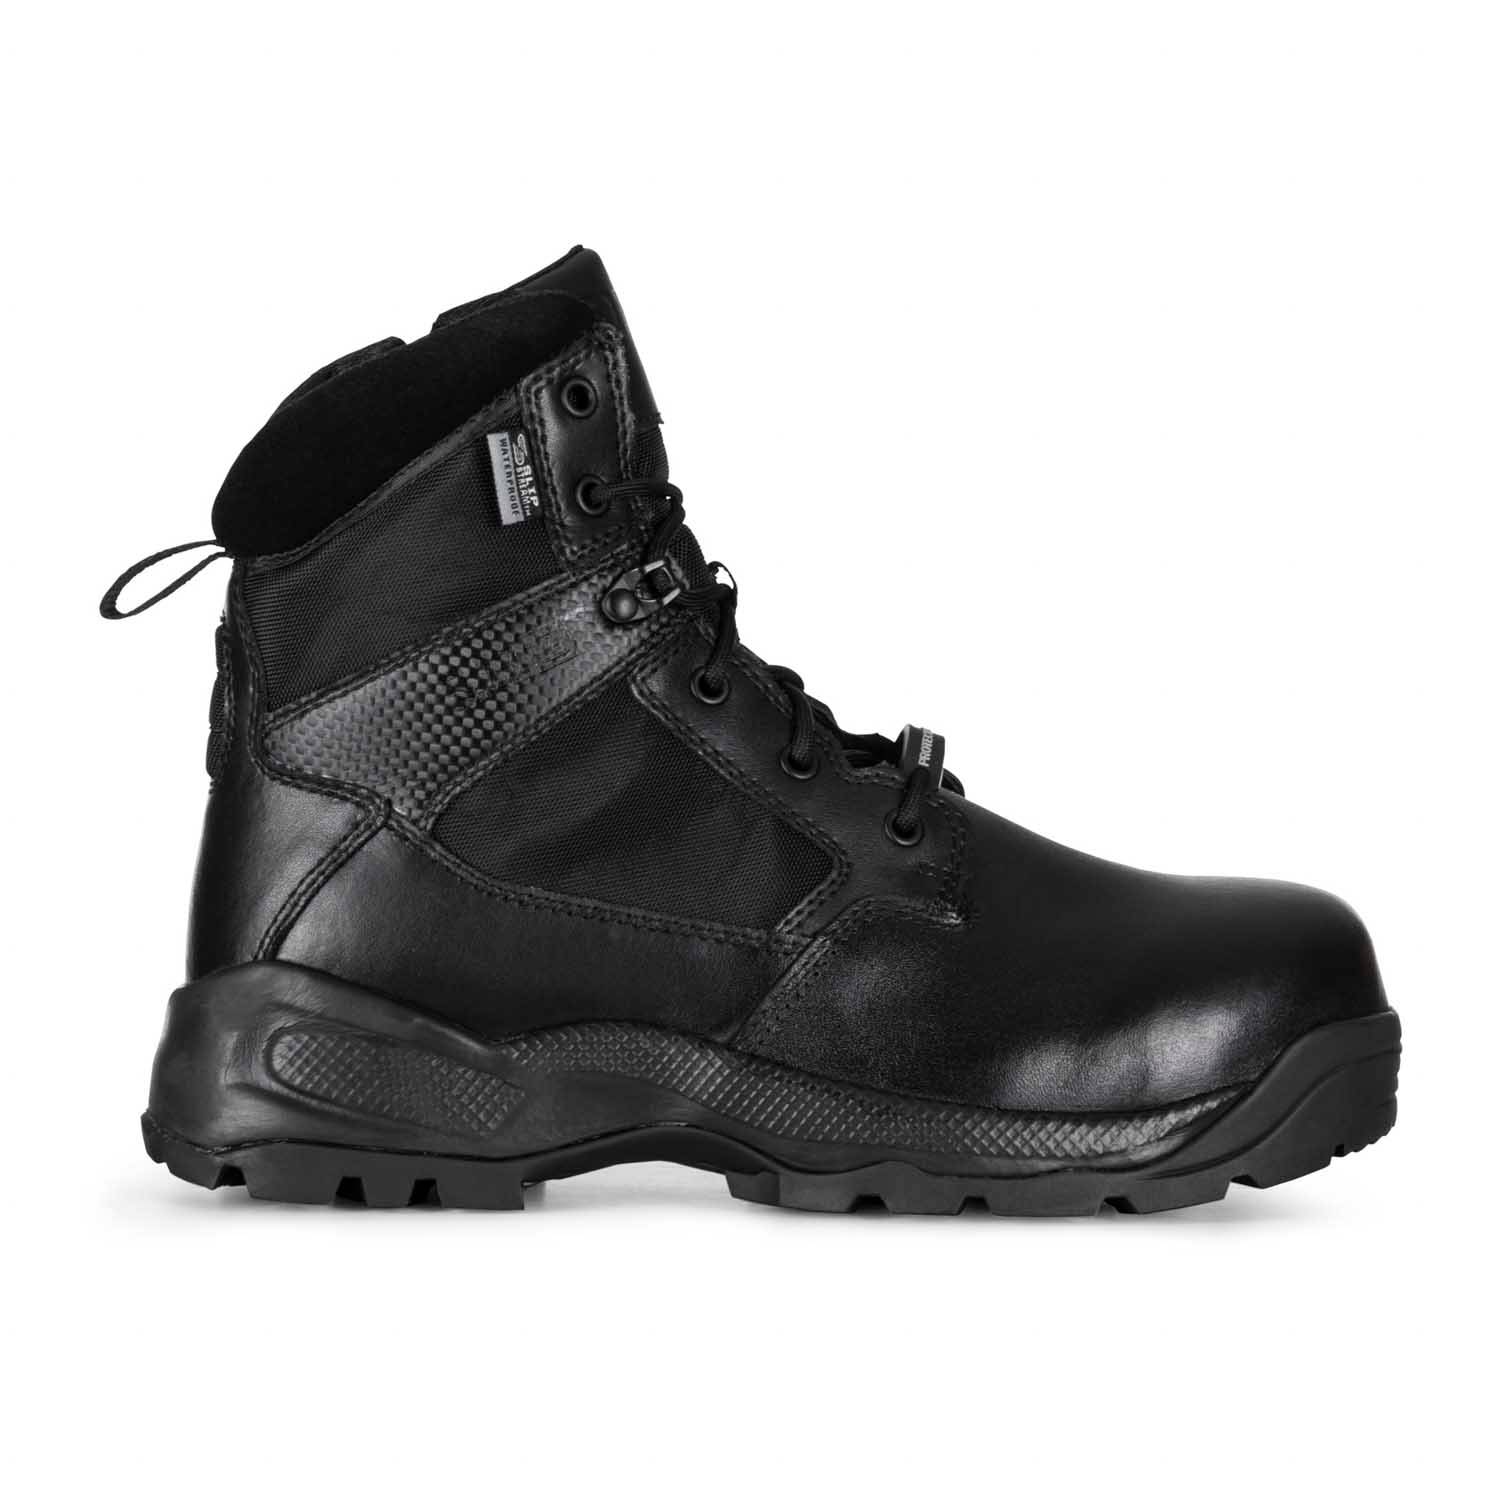 5.11 A.T.A.C. 2.0 6" Shield Side Zip Boots